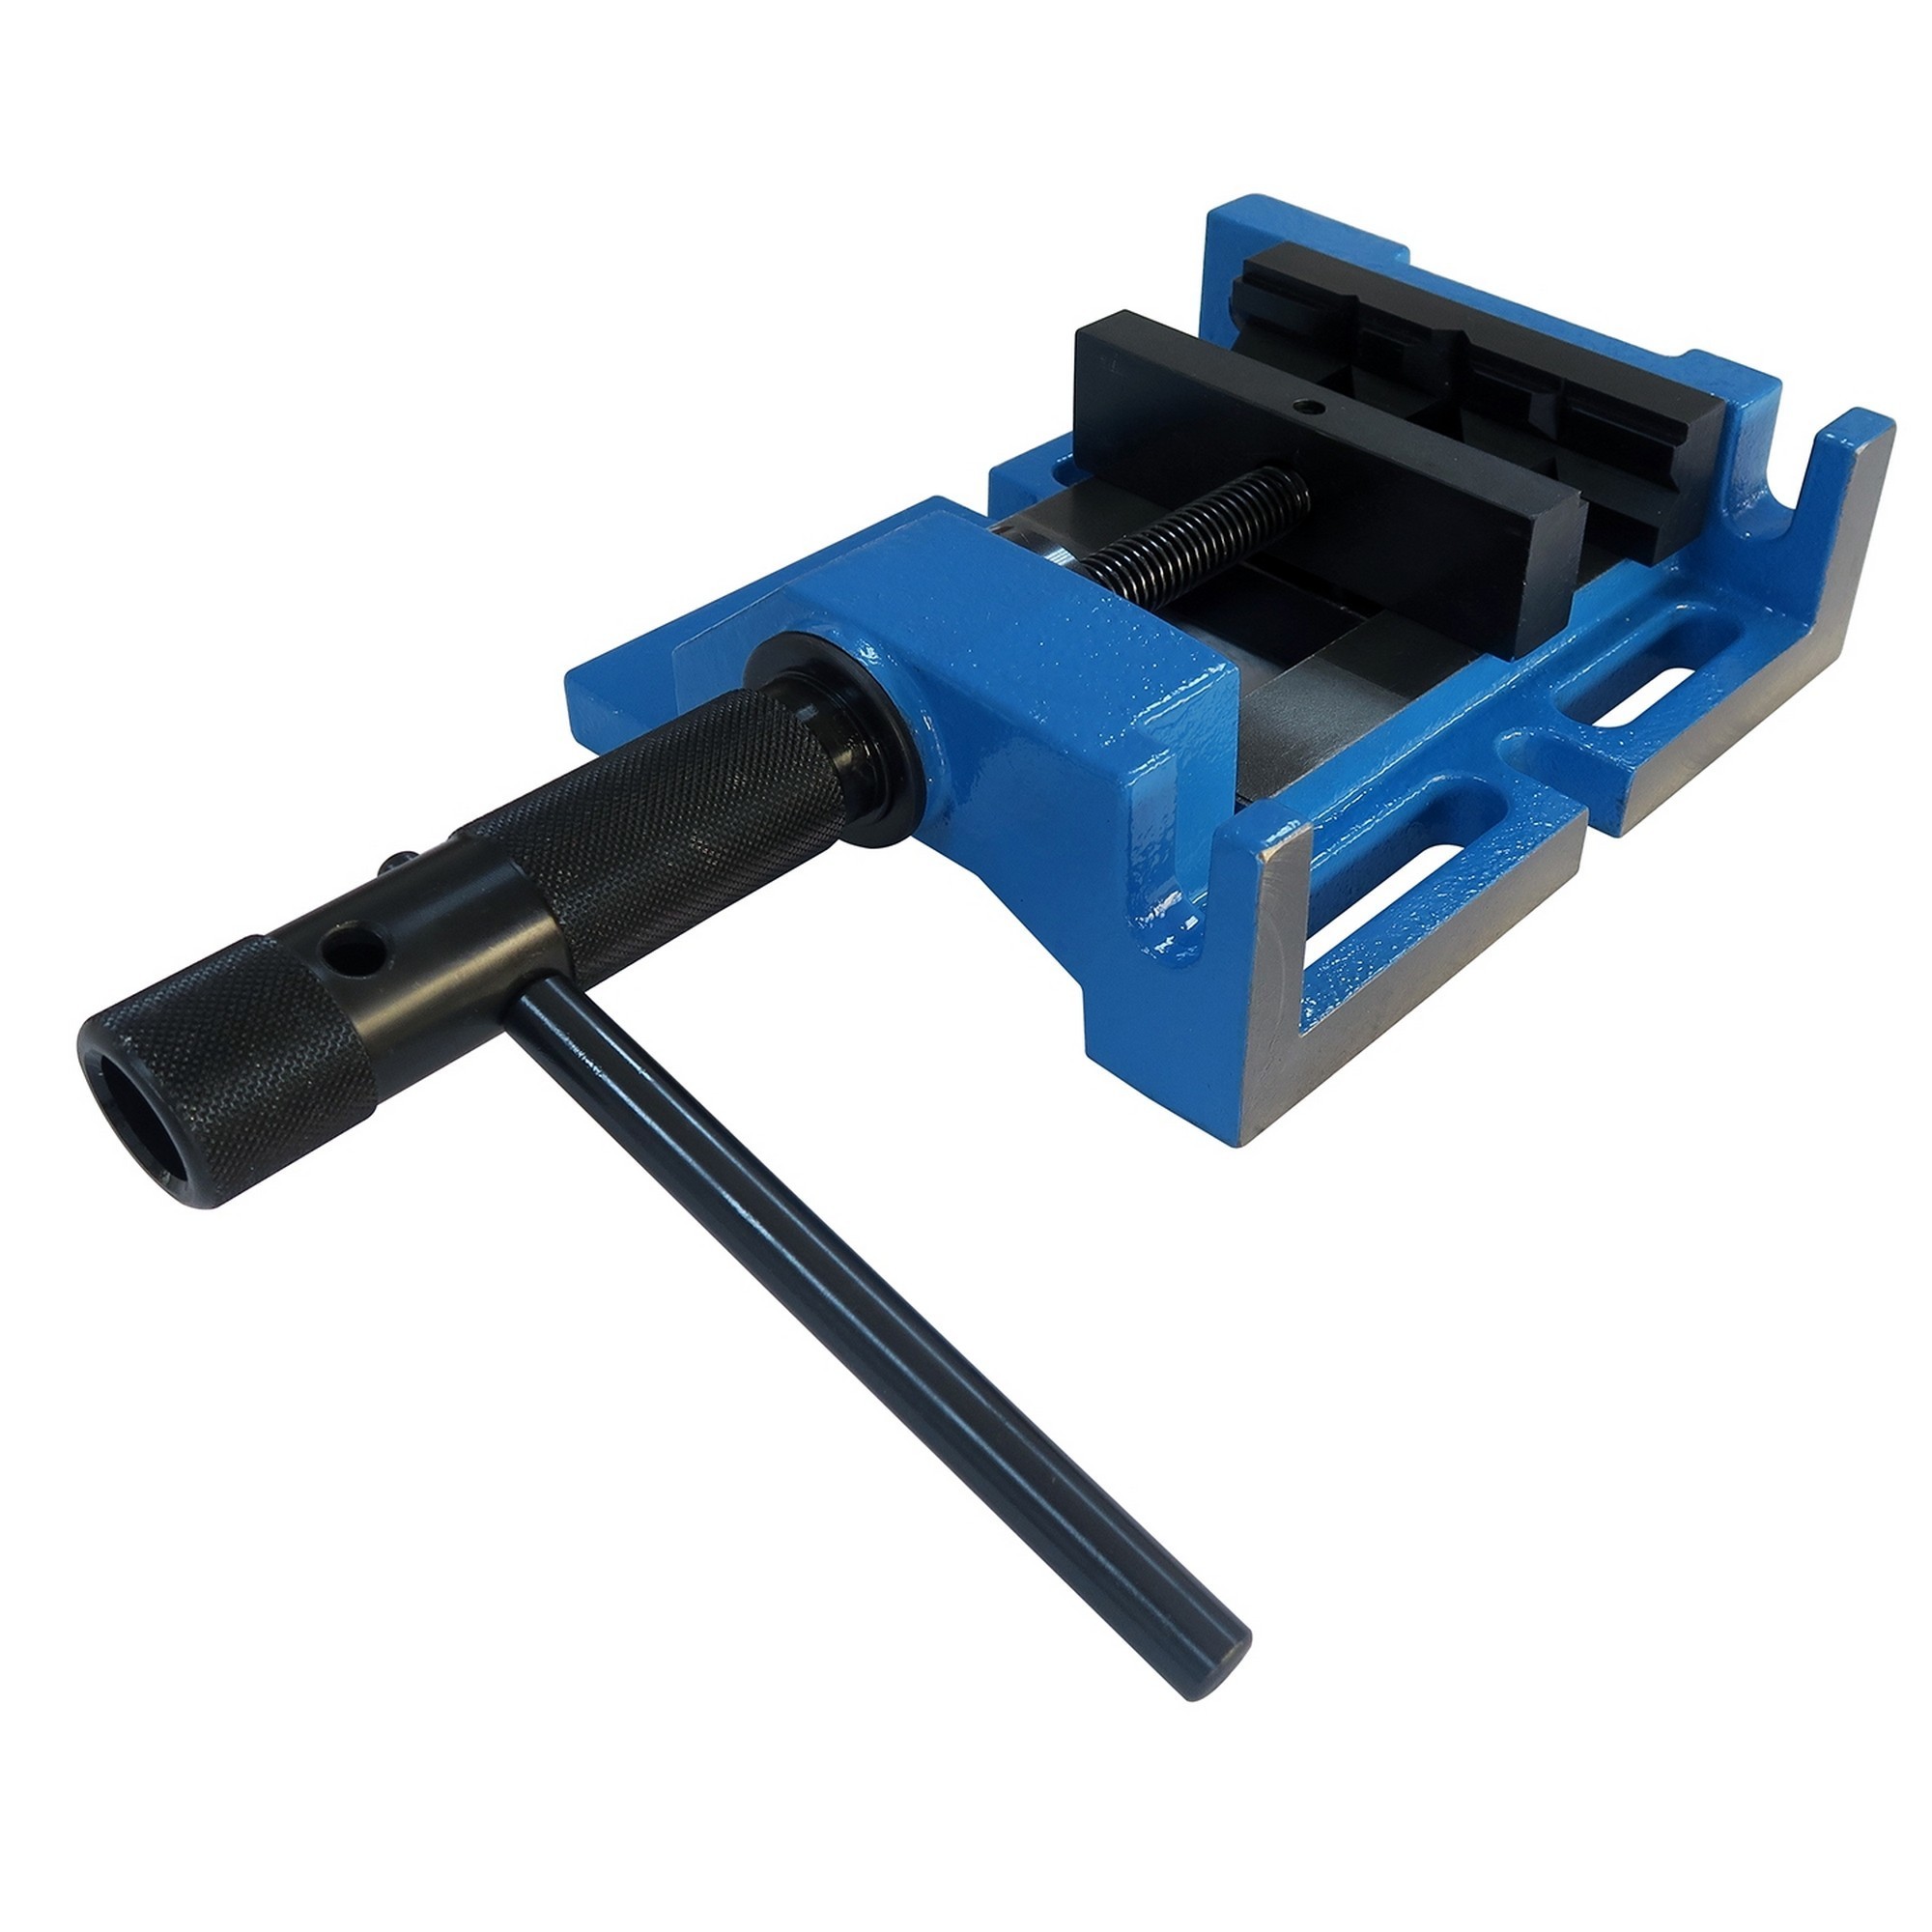 Baileigh, Vise, Jaw Width 4 in, Jaw Capacity 6 in, Model BV-4M-3